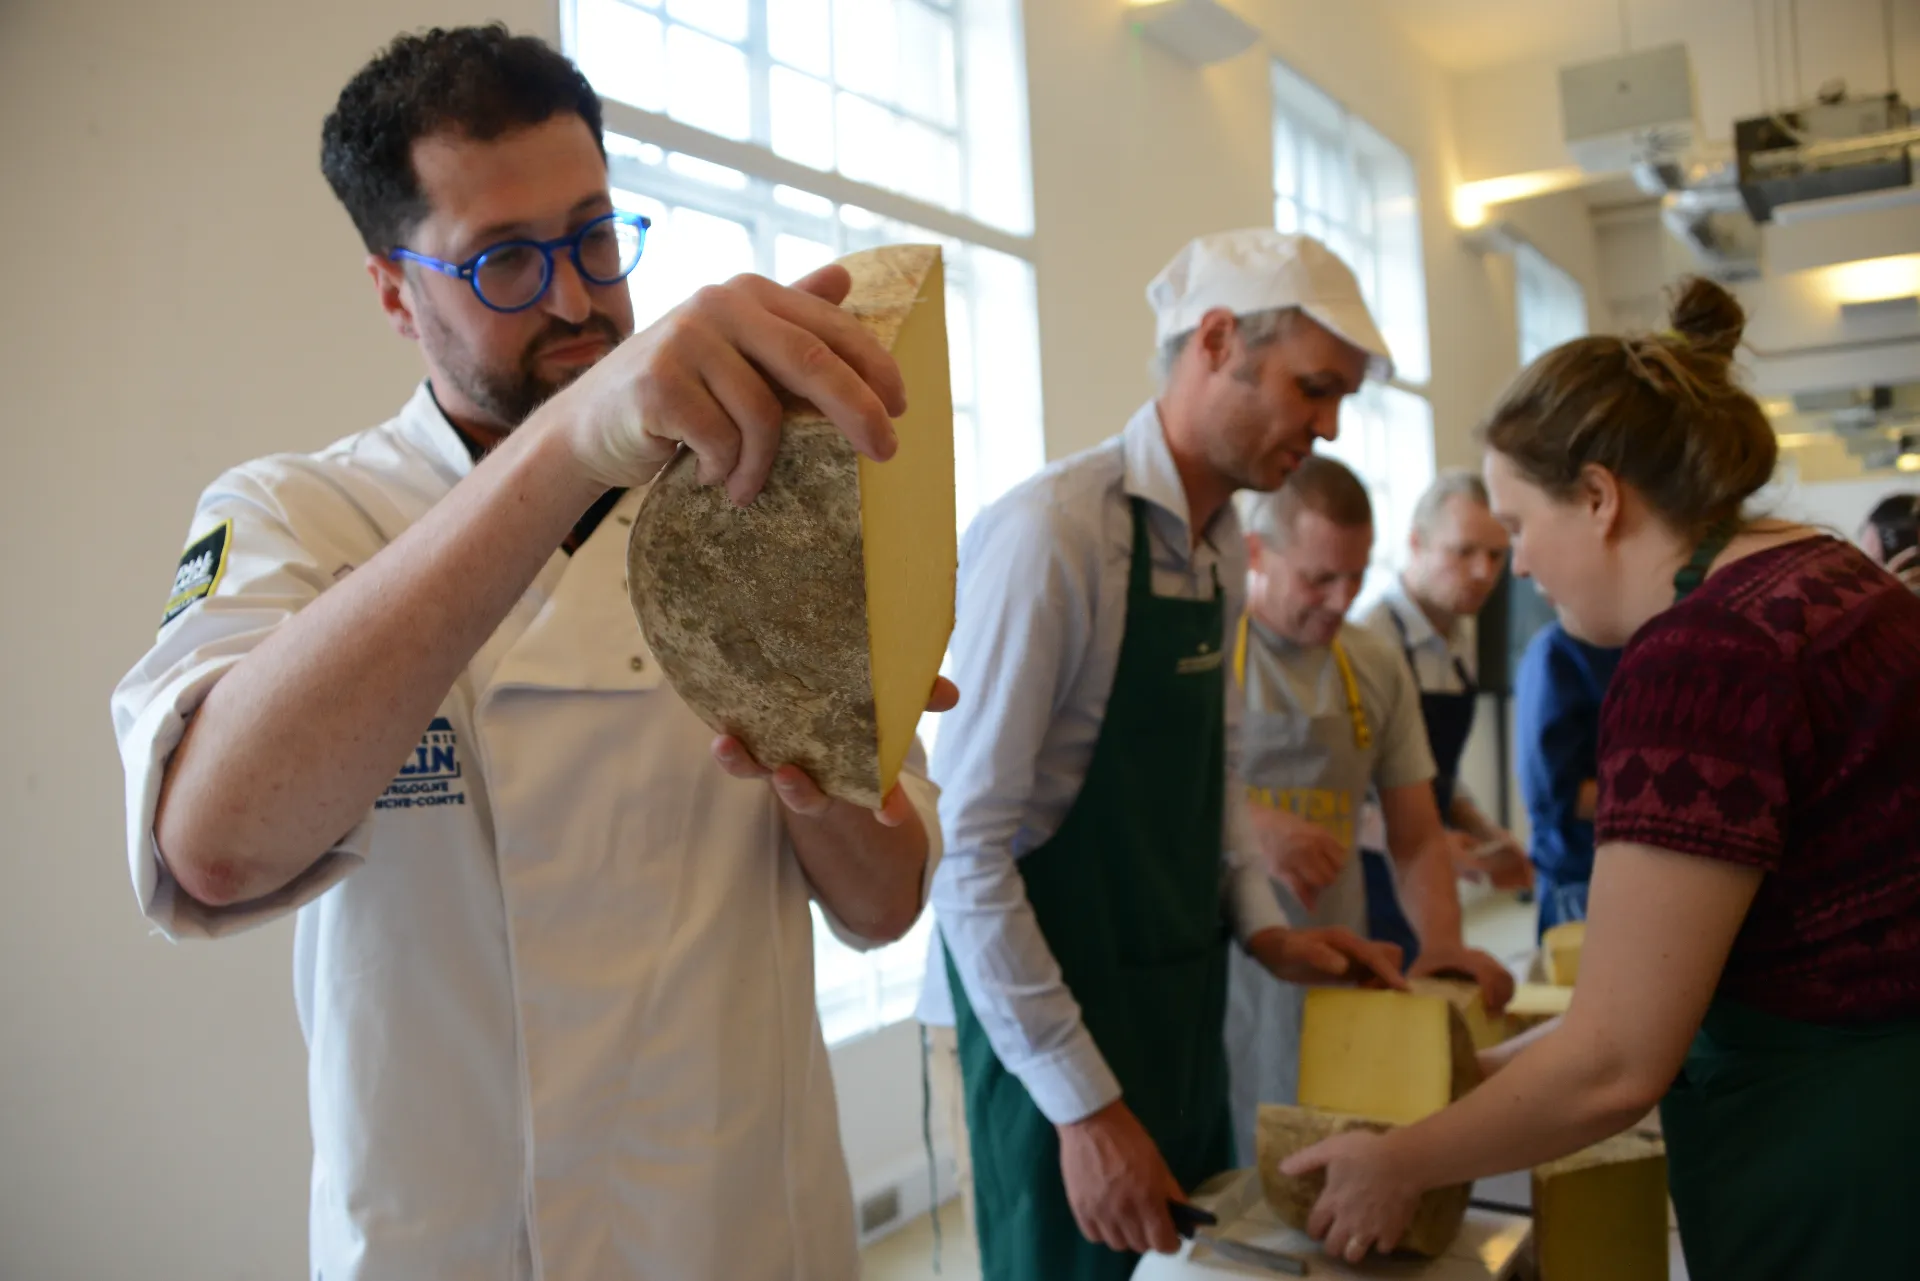 The Cheddar entries are inspected at the Affineur of the Year competition. Credit: Caroline Wood.